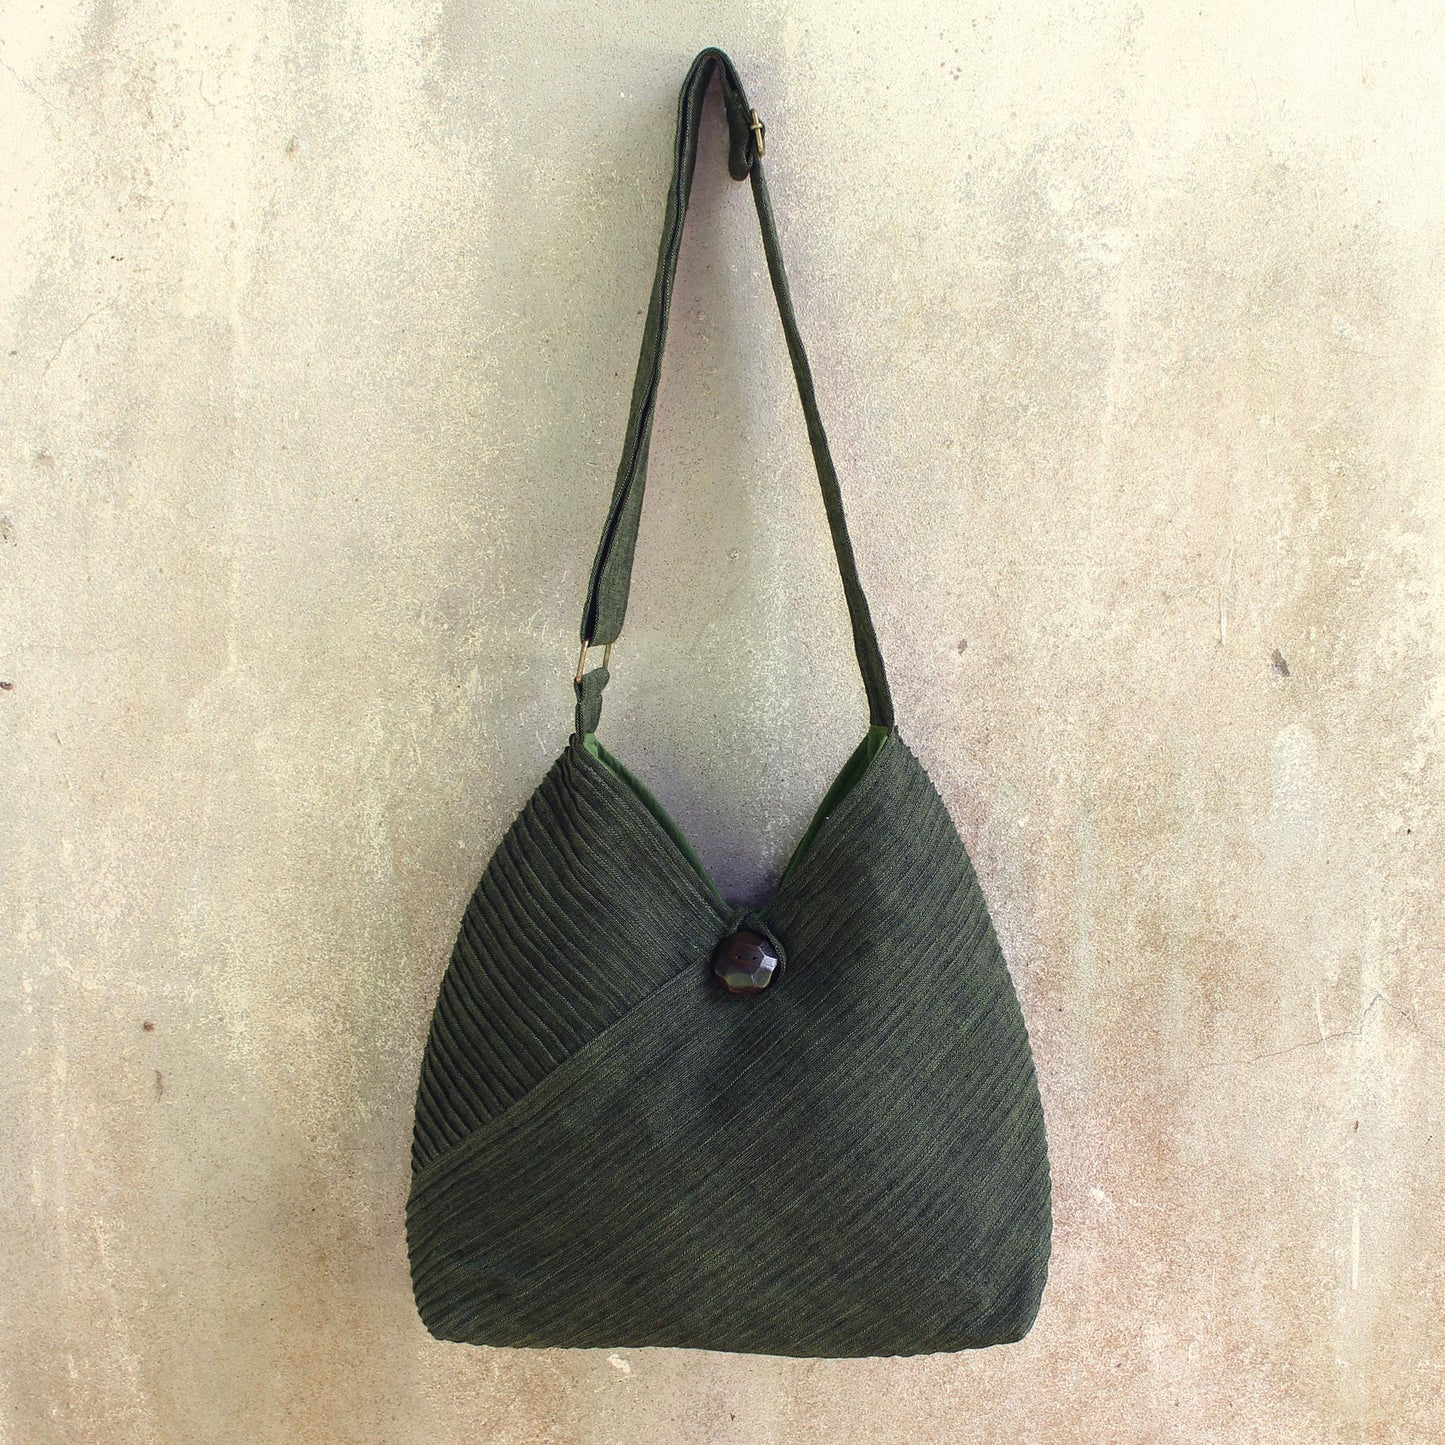 Surreal Green Hobo Bag With Coin Purse